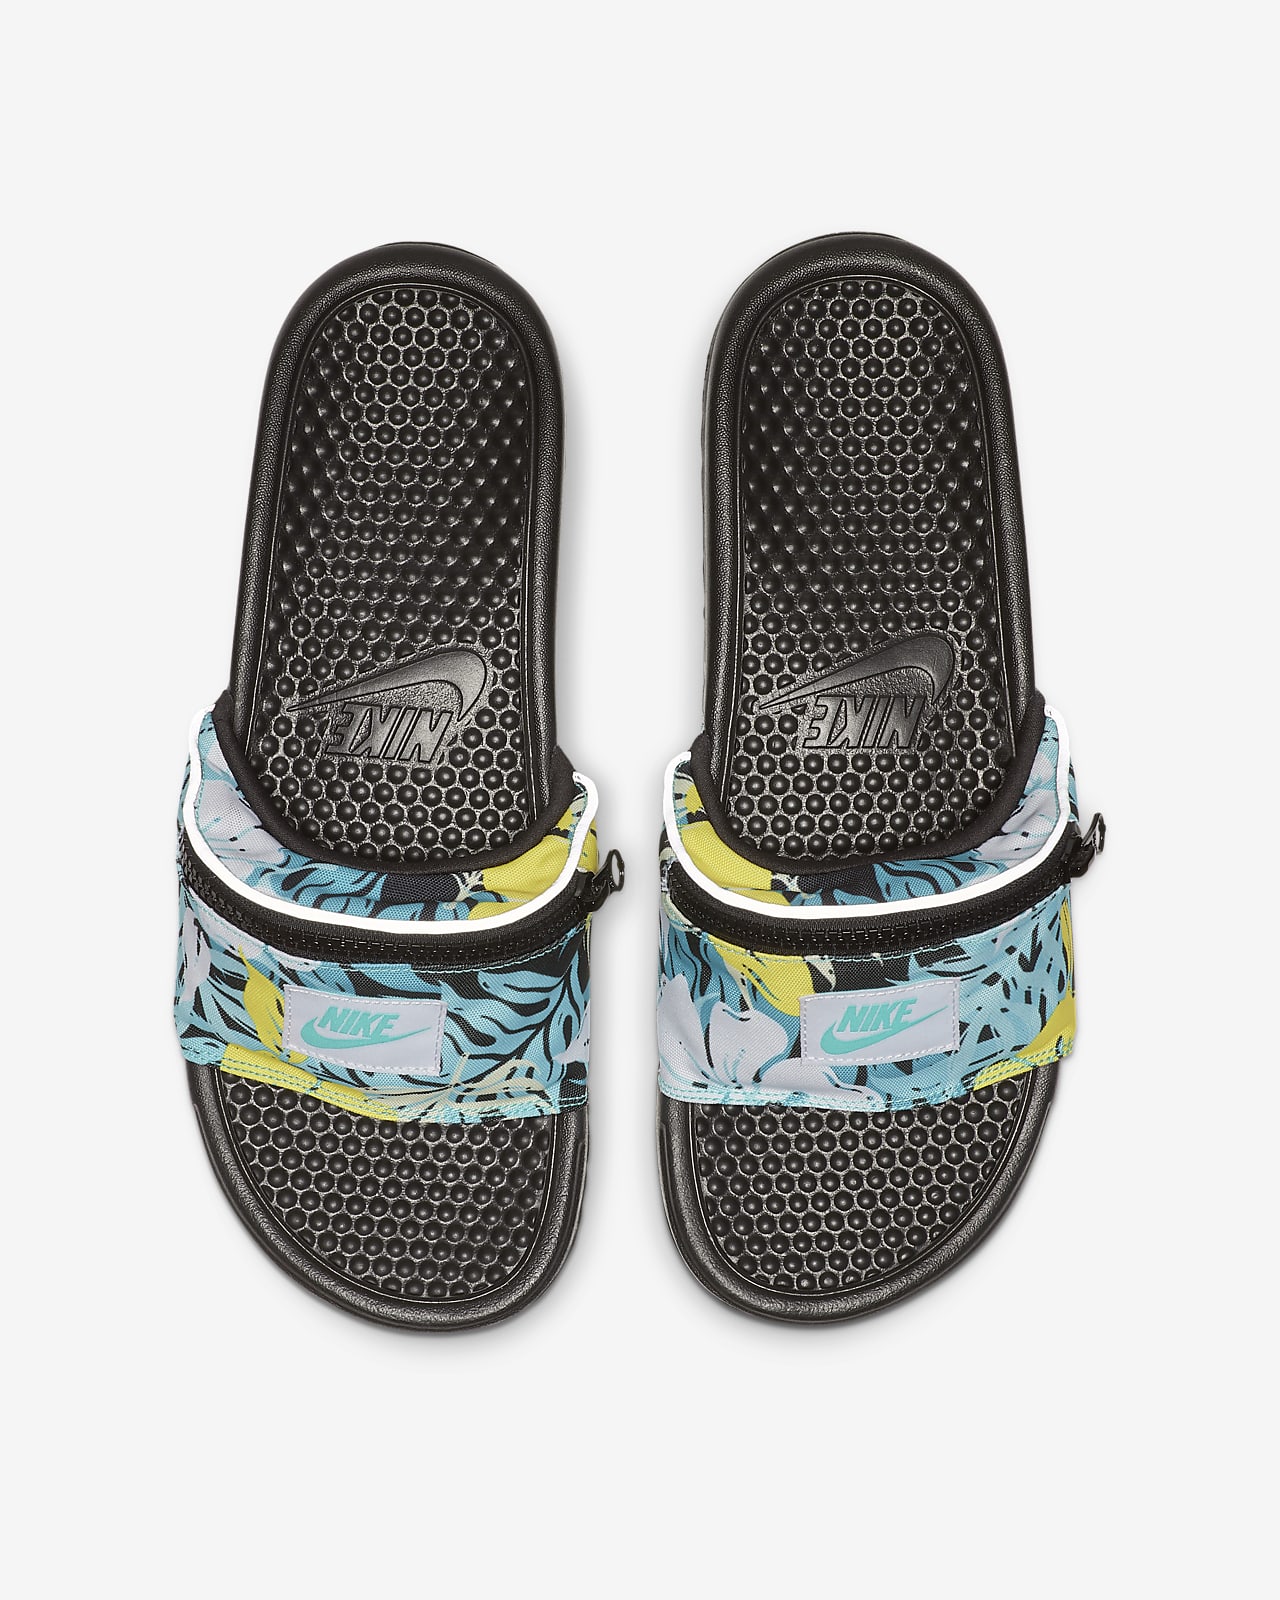 nike sandals with pouch